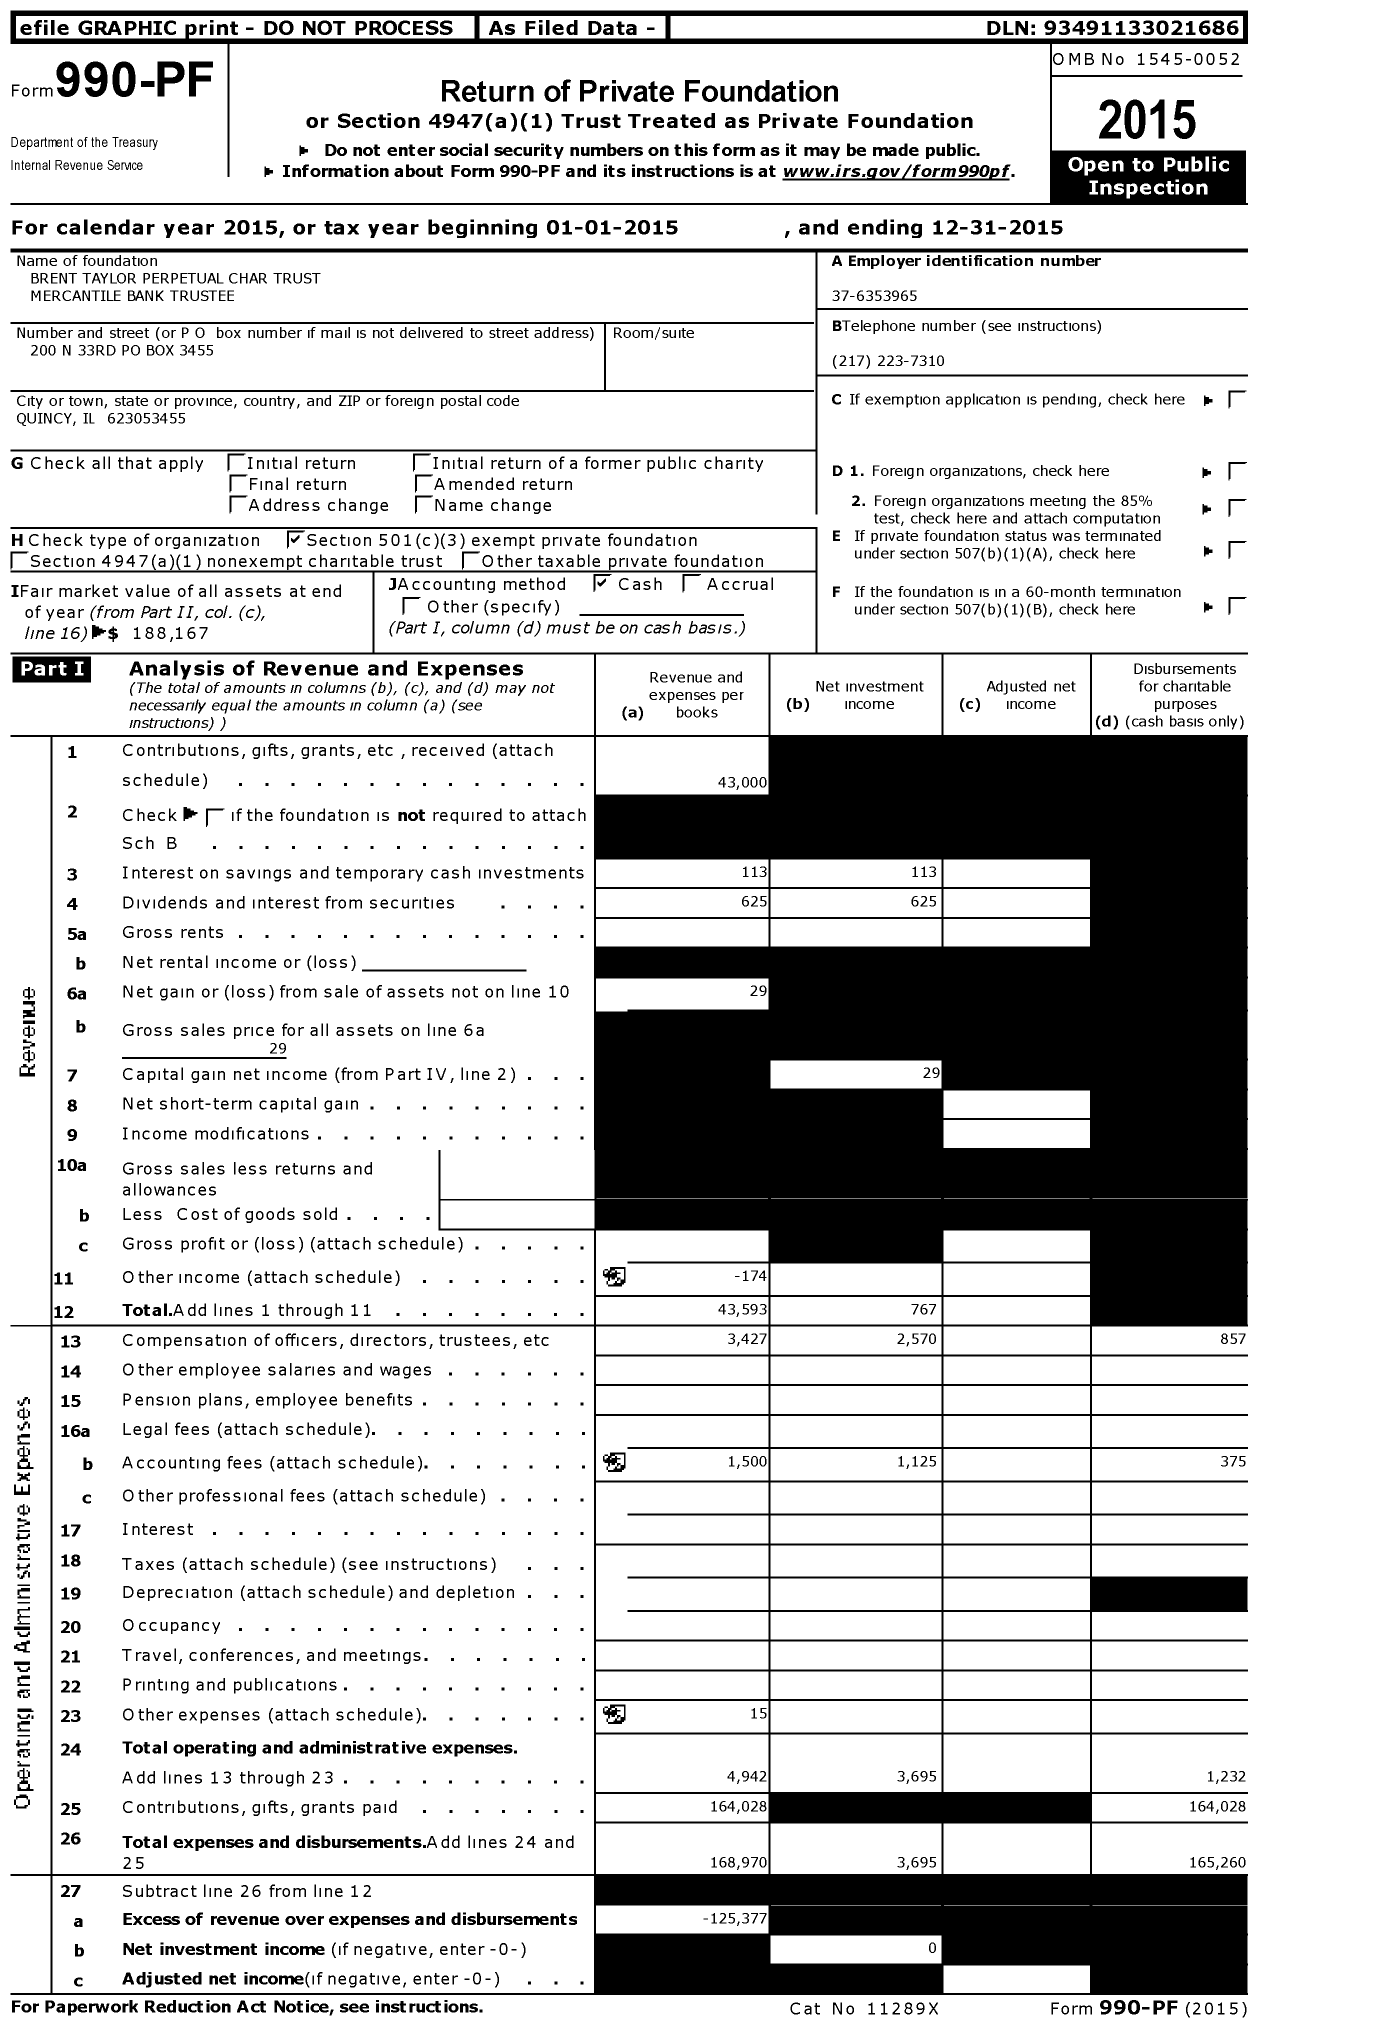 Image of first page of 2015 Form 990PF for Brent Taylor Perpetual Char Trust Mercantile Bank Trustee